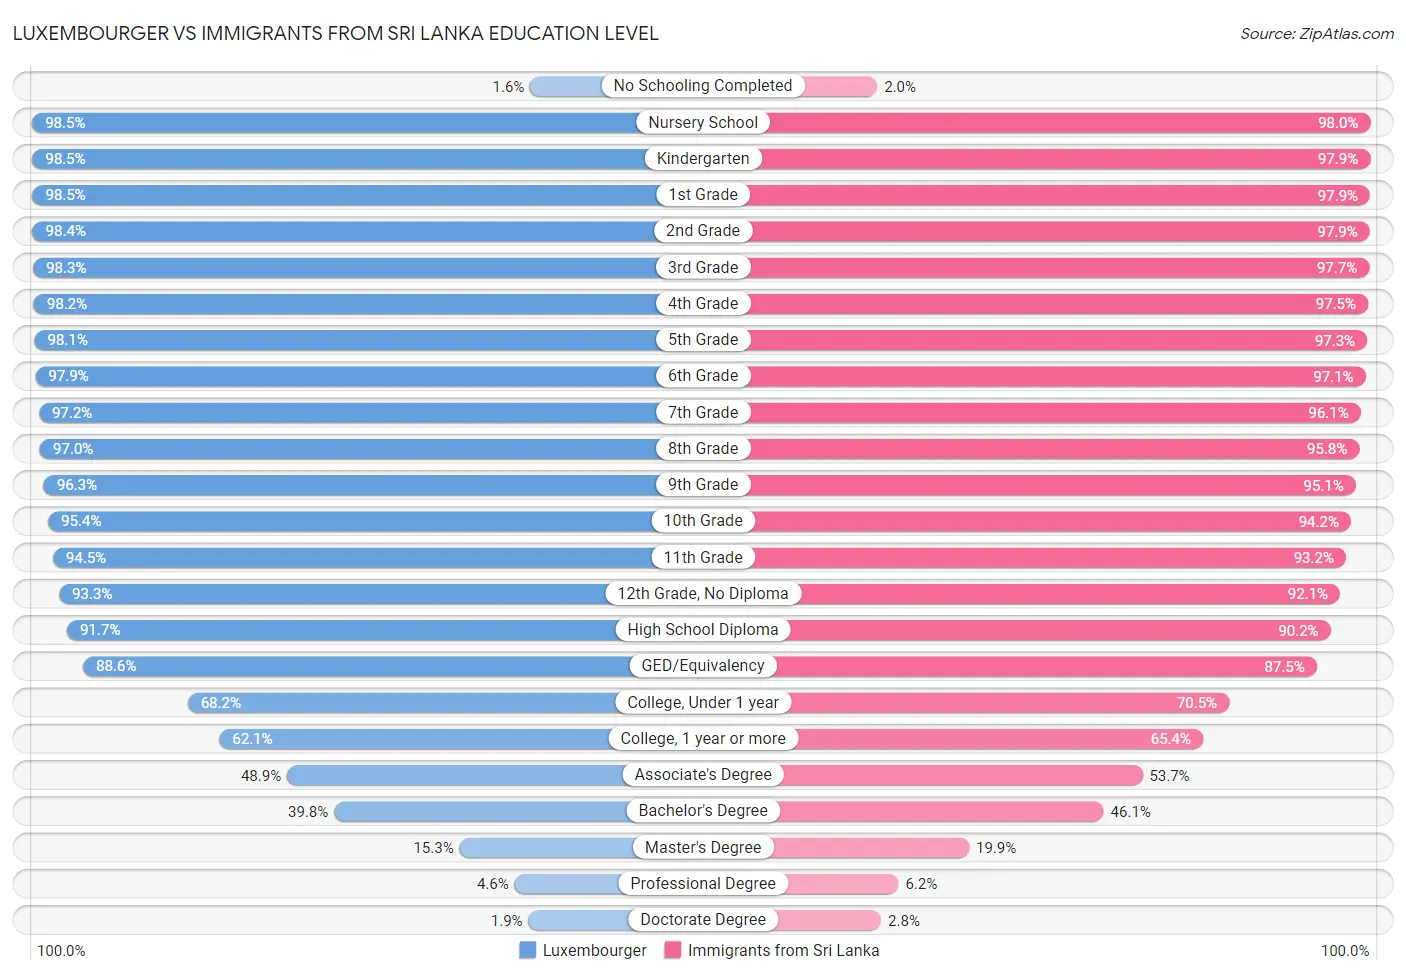 Luxembourger vs Immigrants from Sri Lanka Education Level